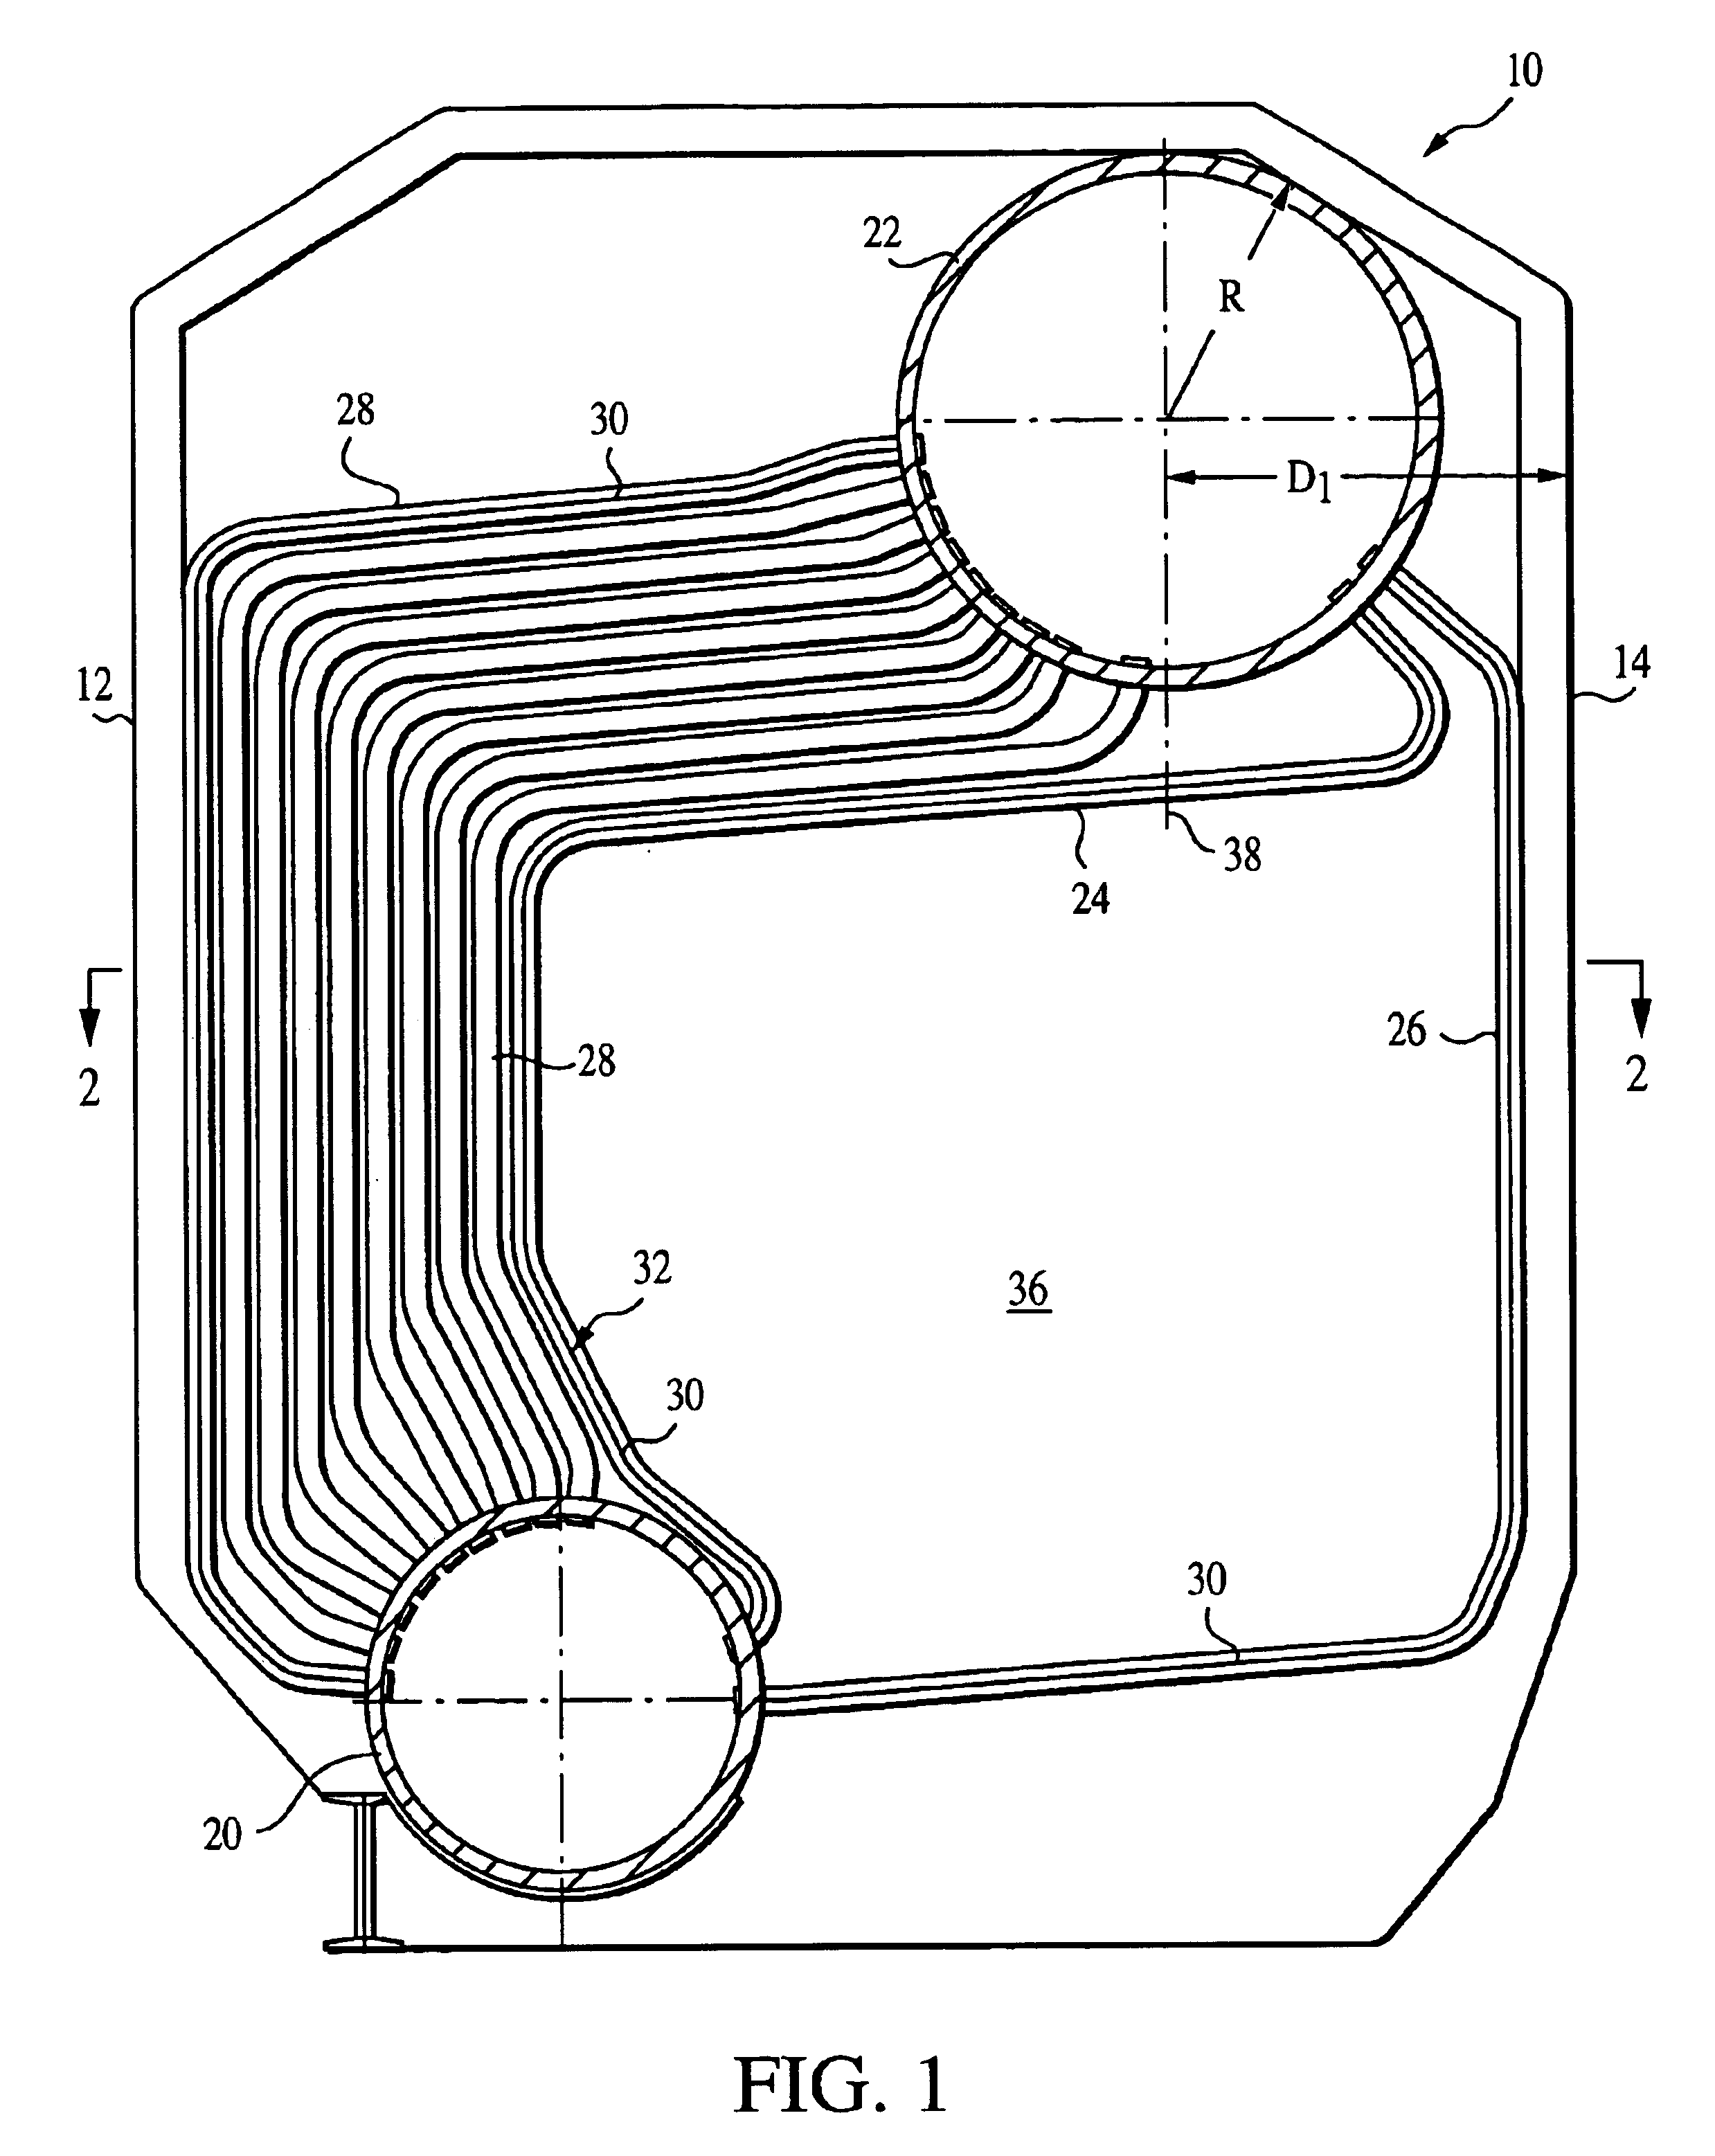 Package water tuble boiler having two offset drums